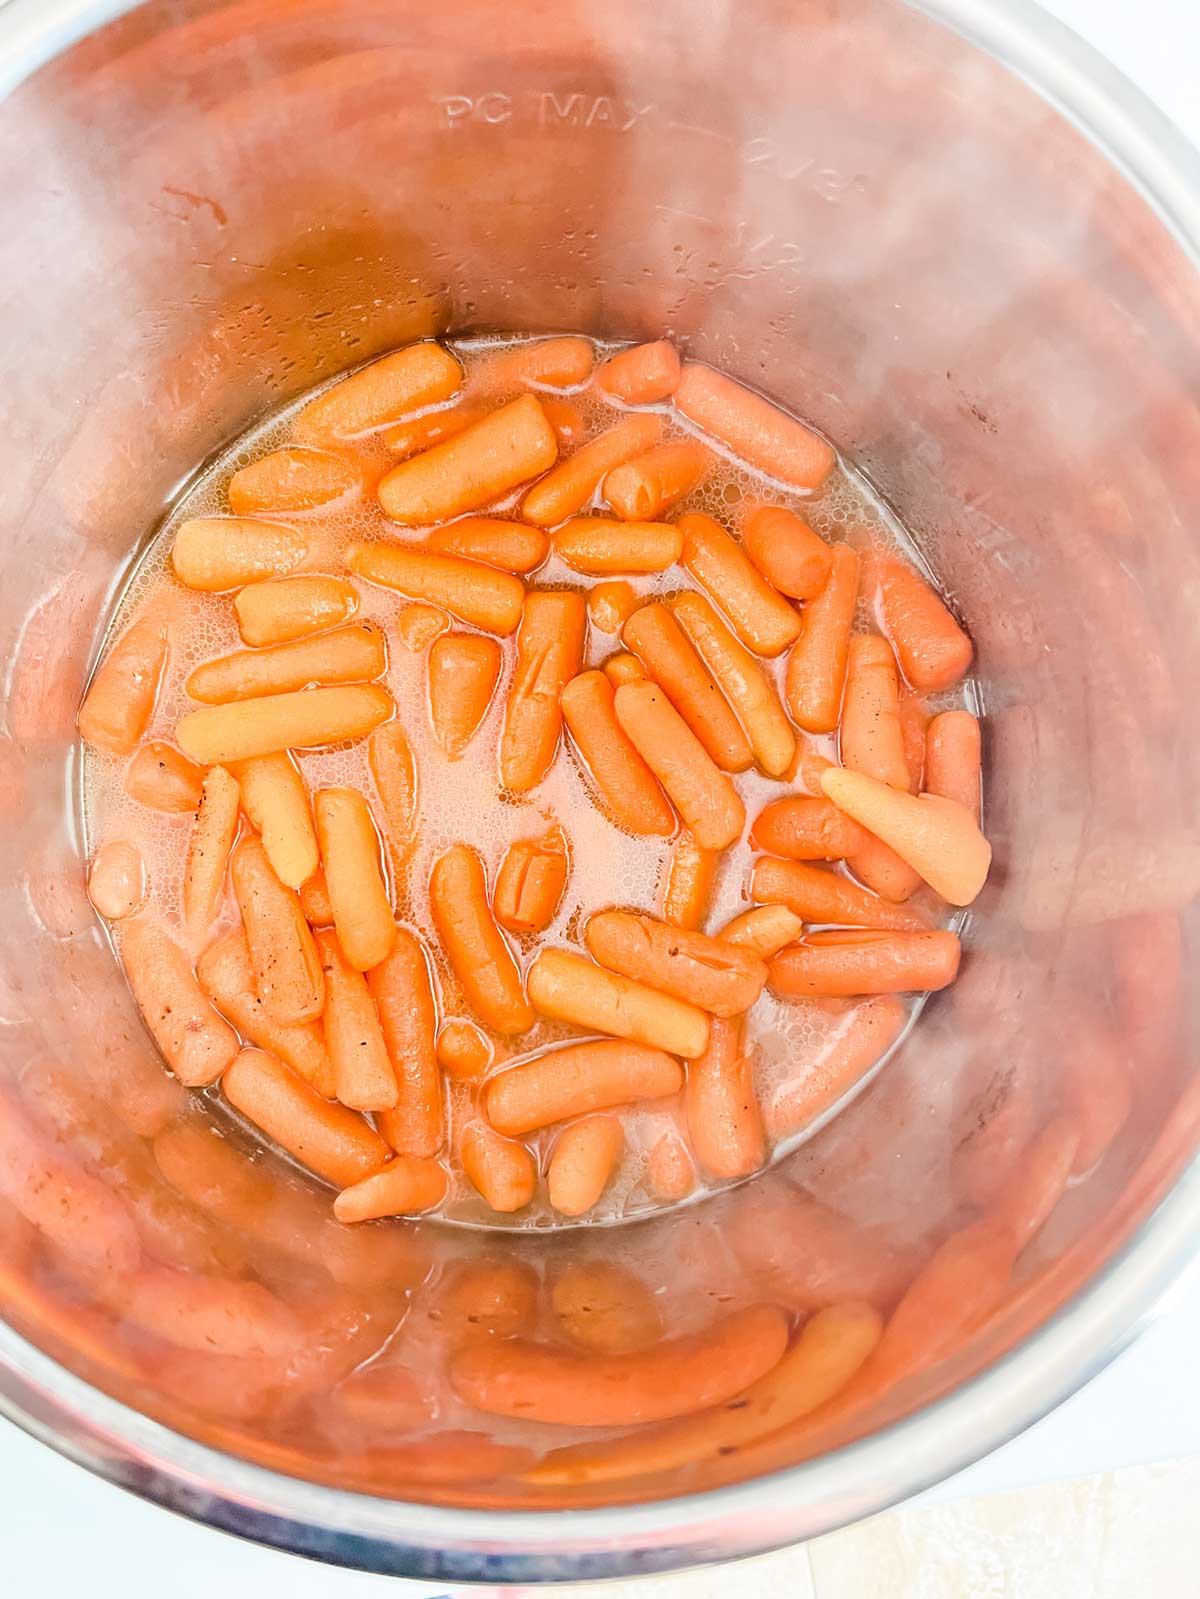 Photo of carrots that have just been cooked in an Instant Pot.